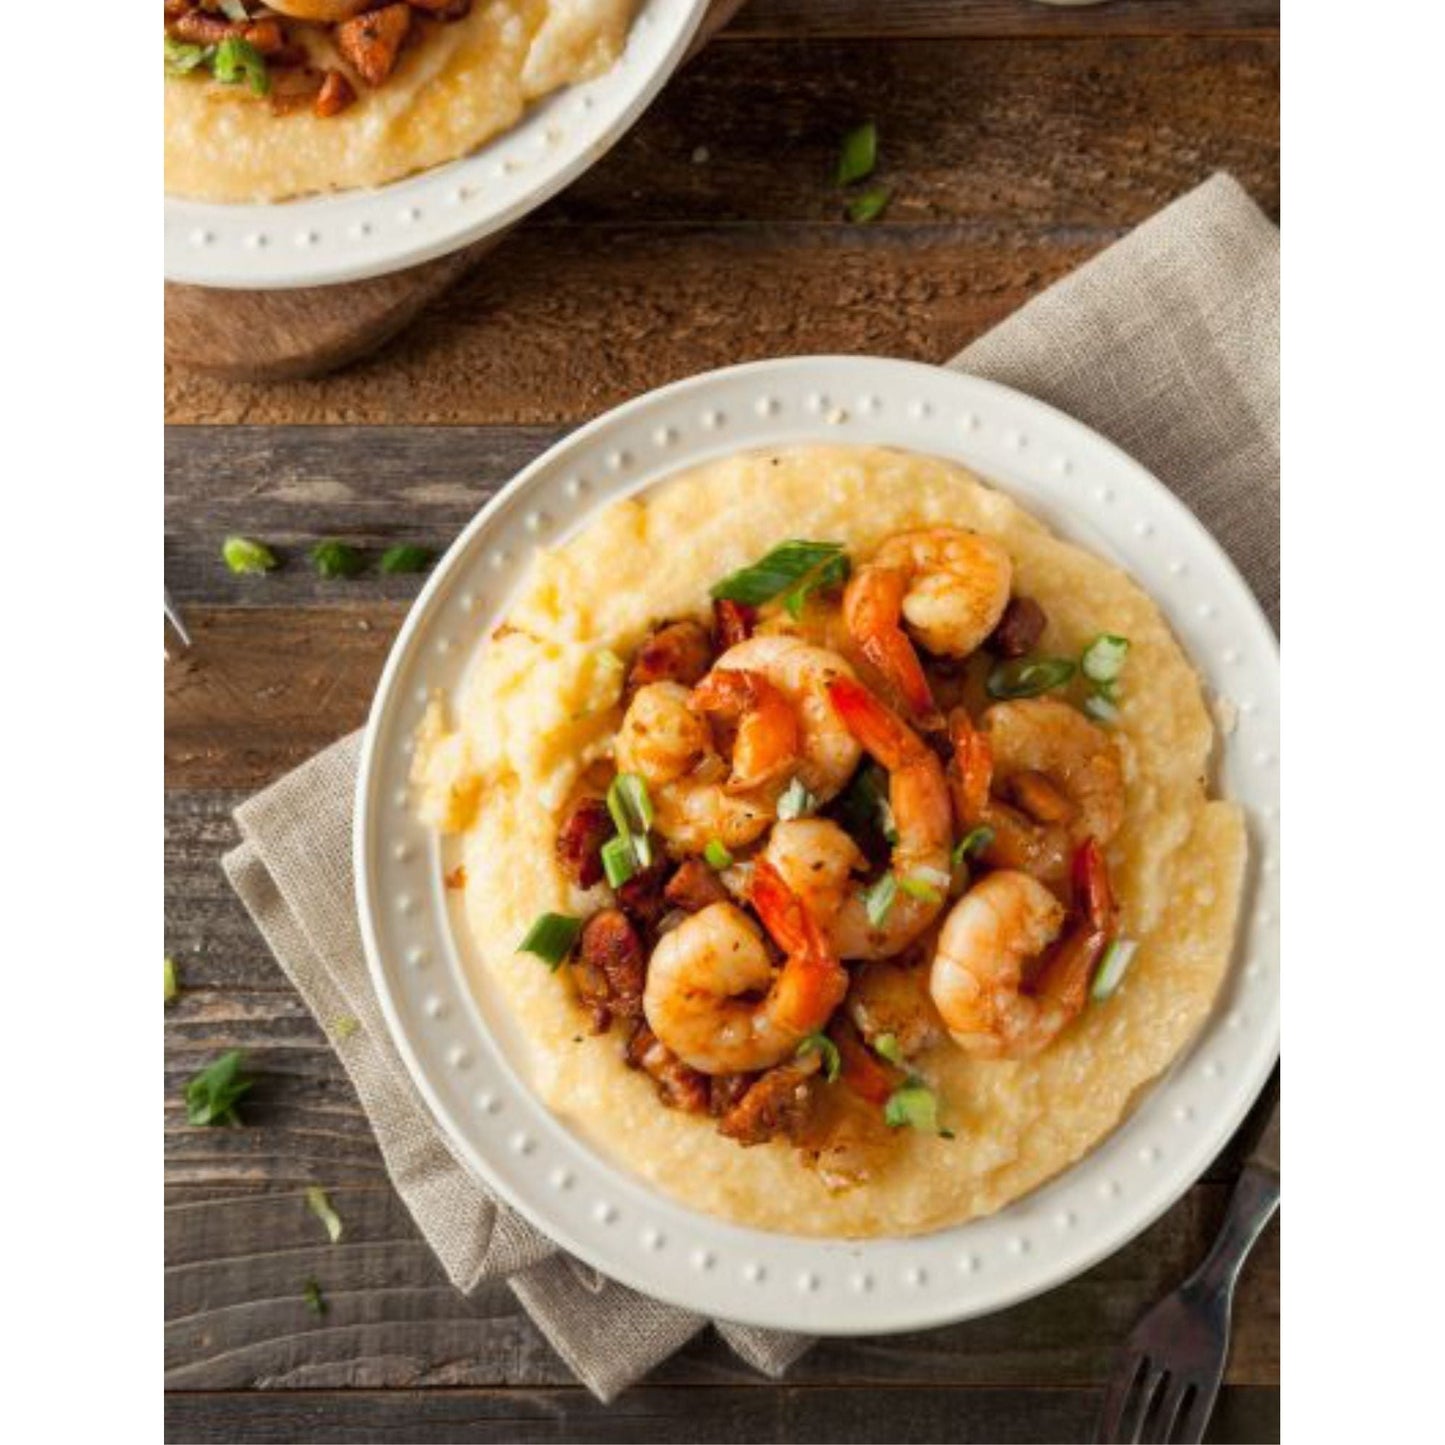 Shrimp n' Grits One Pot Dish with grits included - Kitcheneez Mixes & More!